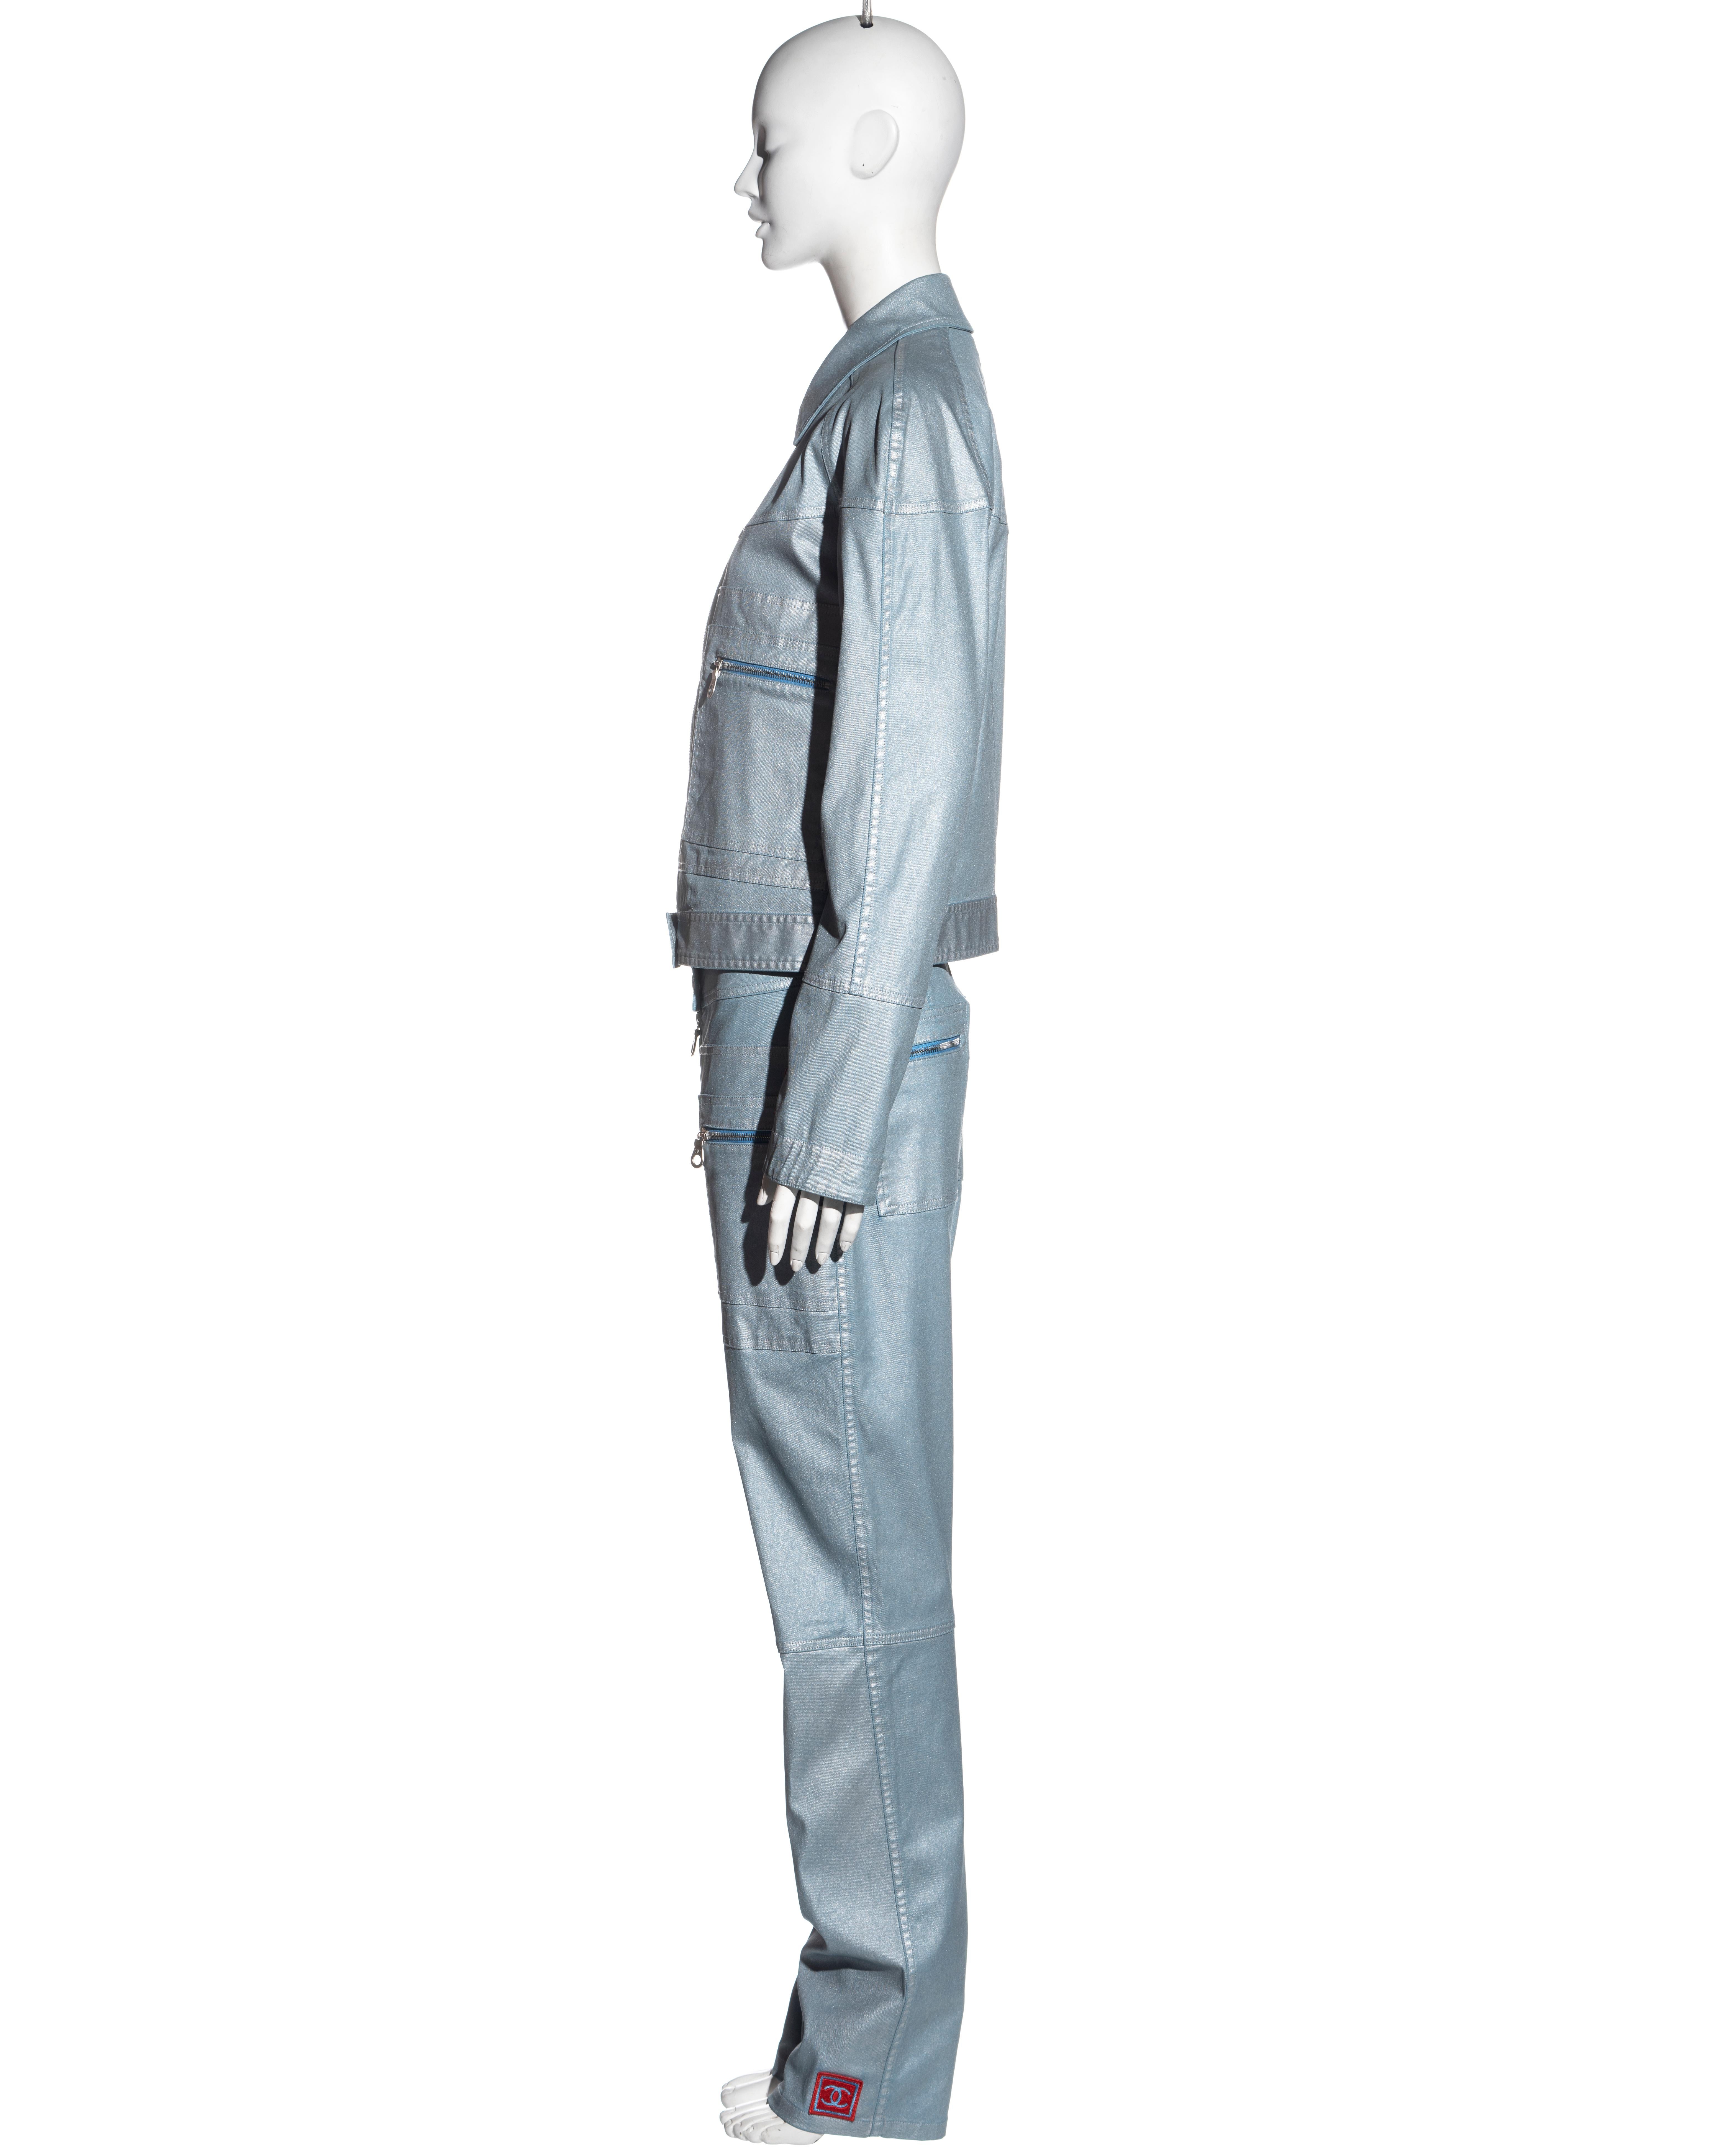 Chanel by Karl Lagerfeld metallic blue cotton jacket and pants set, ss 2002 For Sale 1